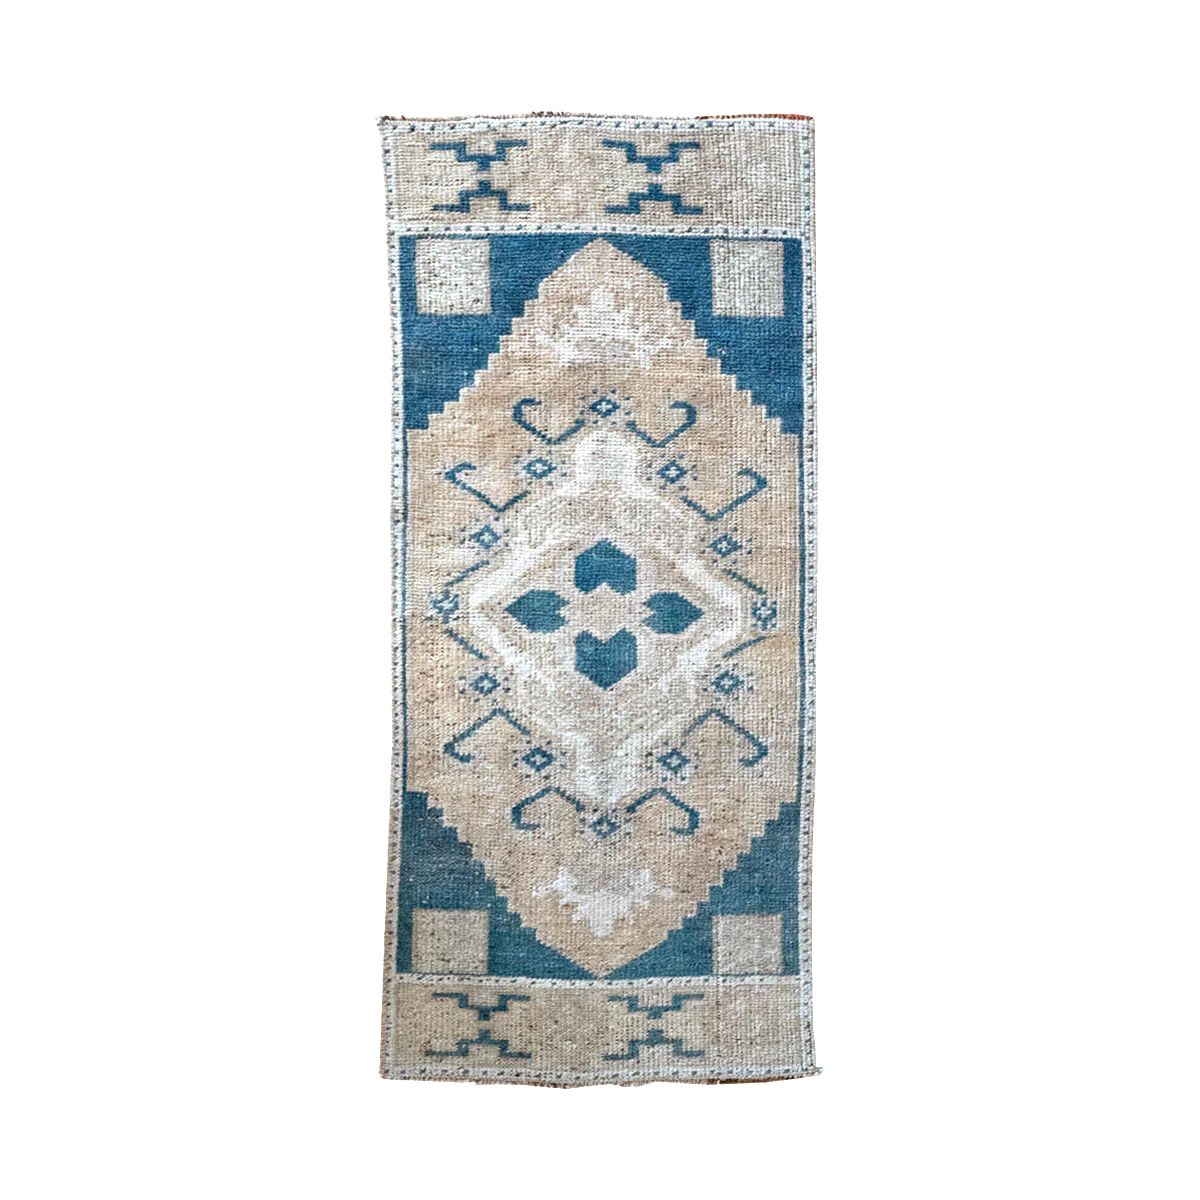 'Astra' Vintage Rug (1 x 3) | Tuesday Made